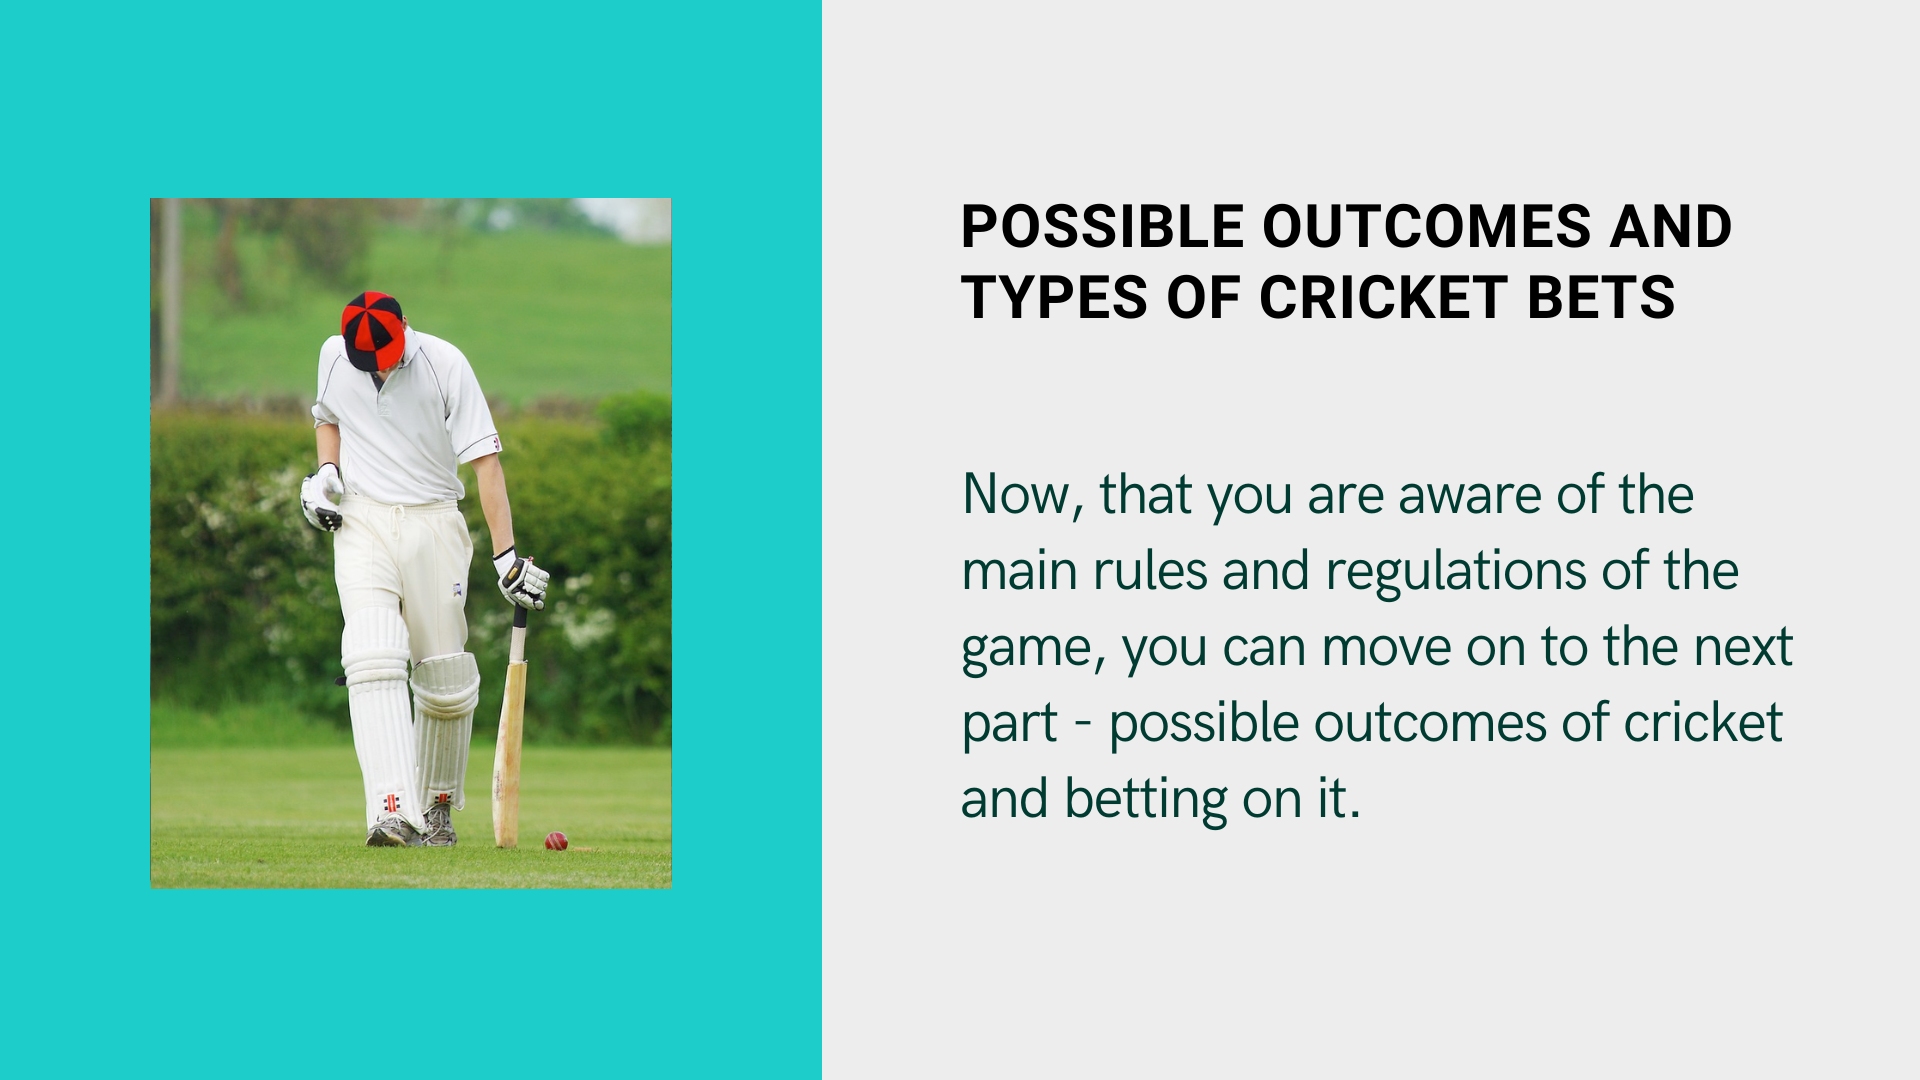 Possible Outcomes and Types of Cricket Bets